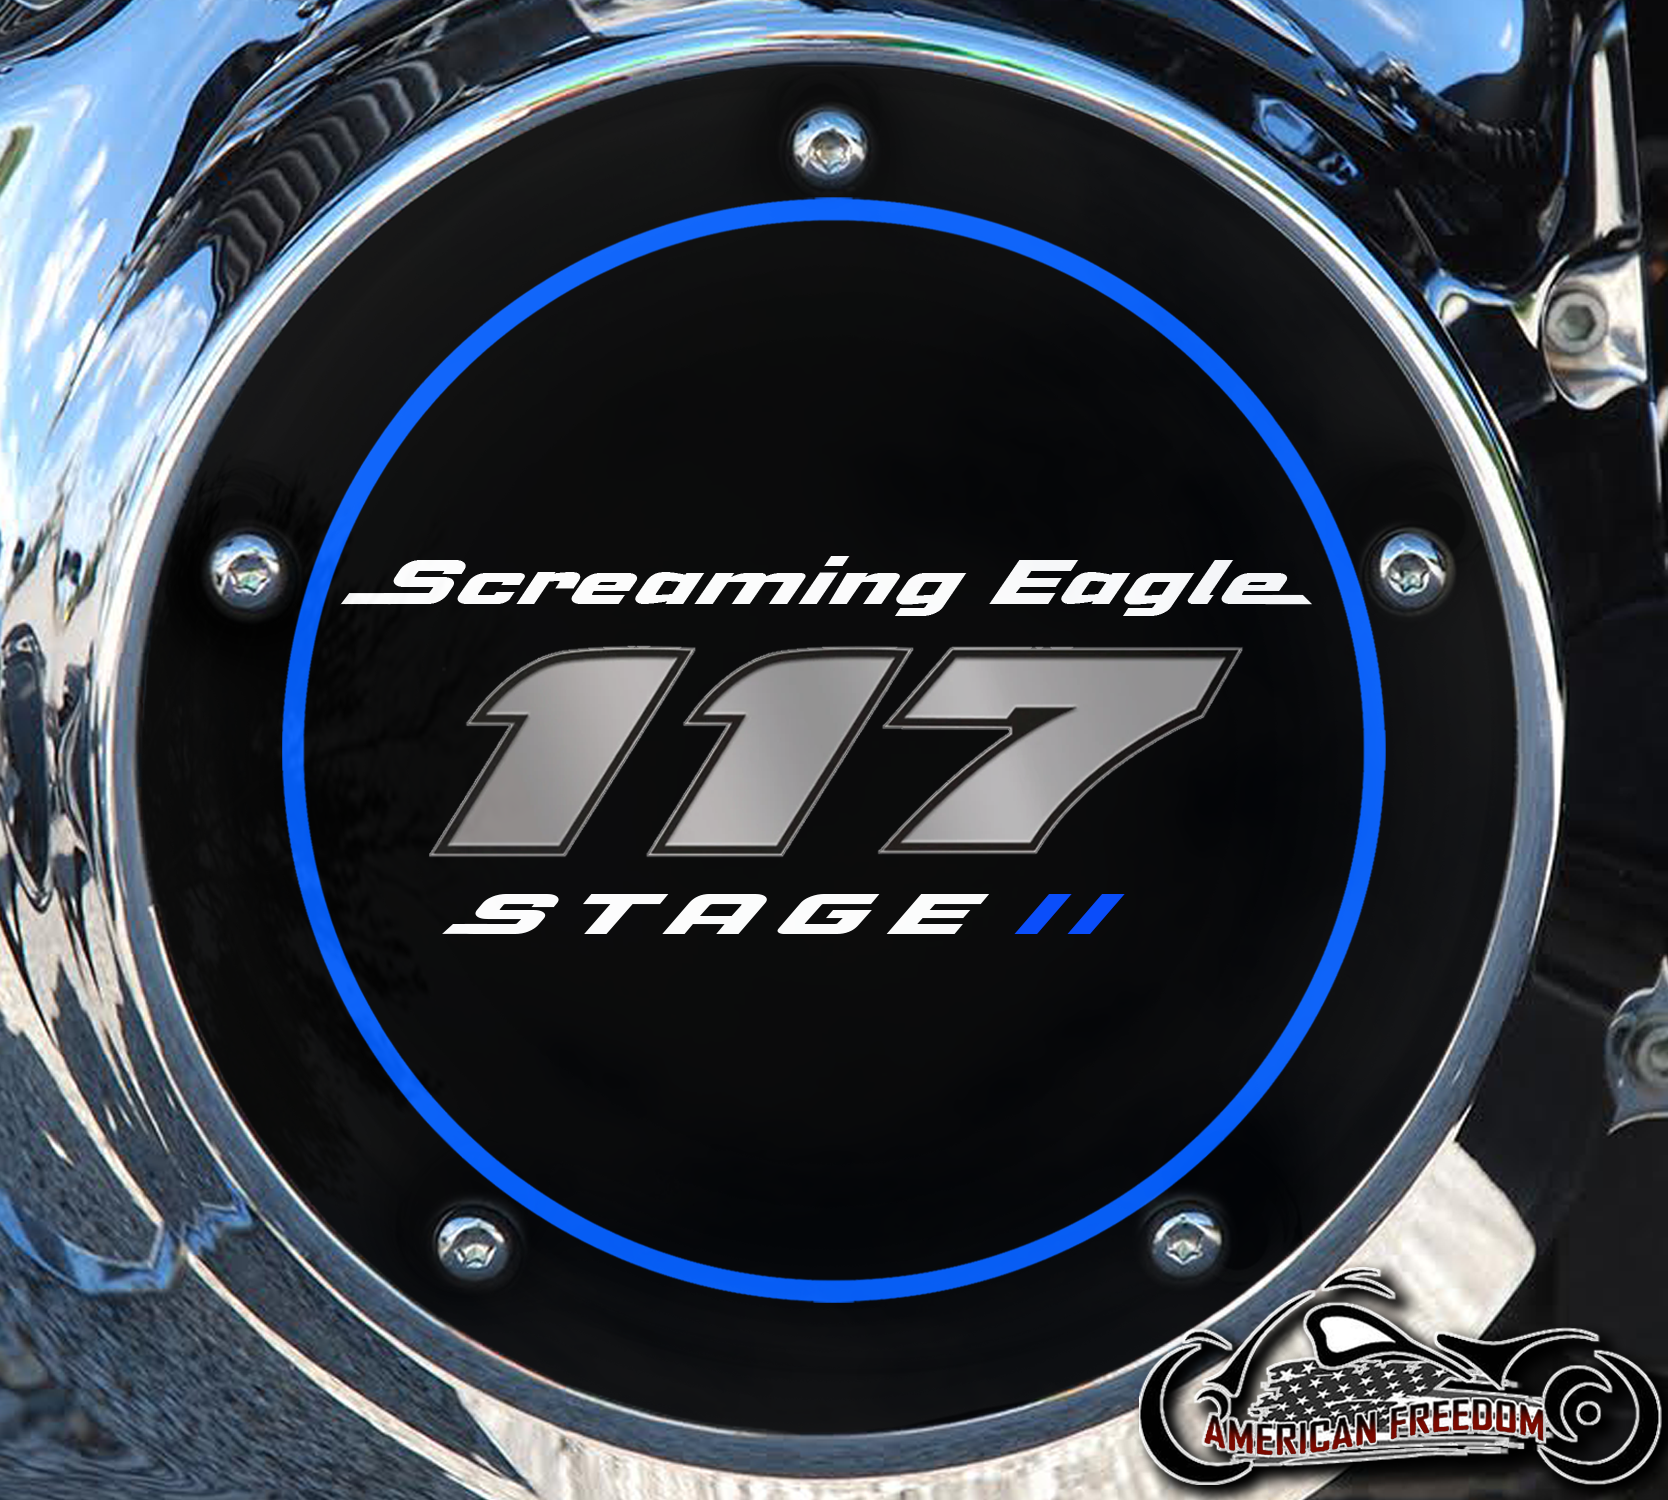 Screaming Eagle Stage II 117 Derby Cover Blue